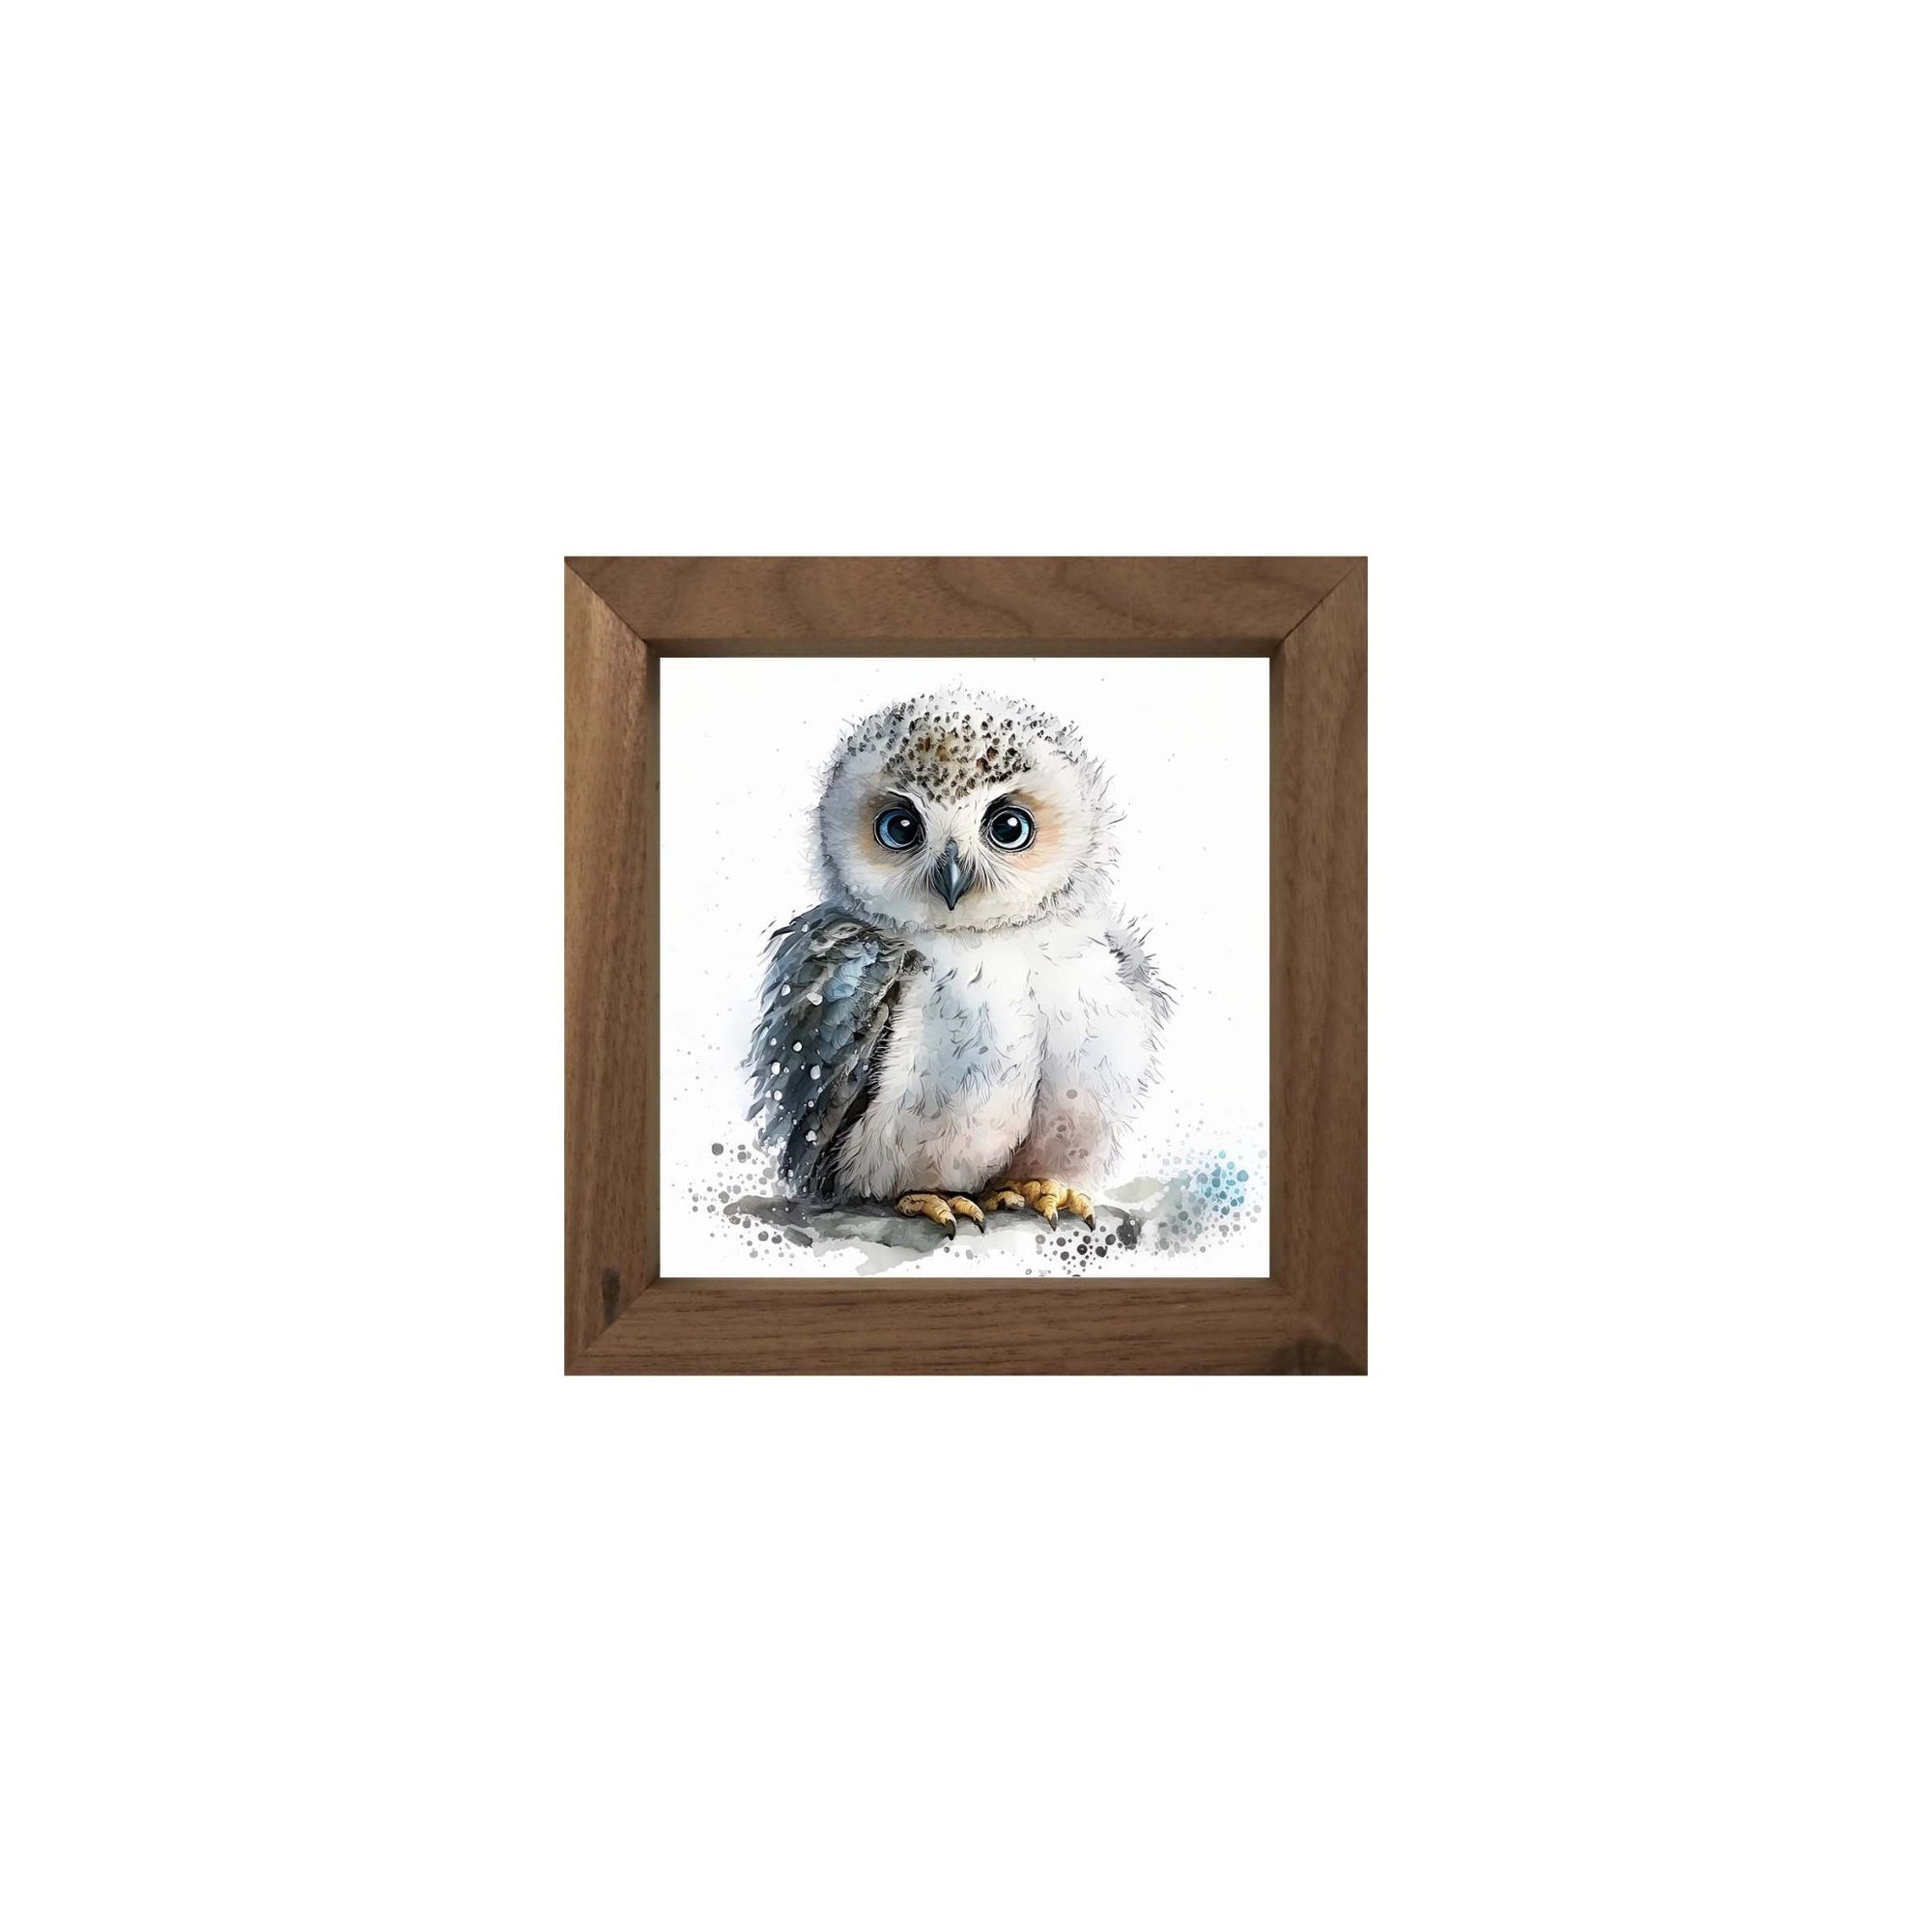 Owl Collection: 7x7 Wooden Wall Art Sign Framed Shadow Box| Baby Owl2 - LifeSong Milestones